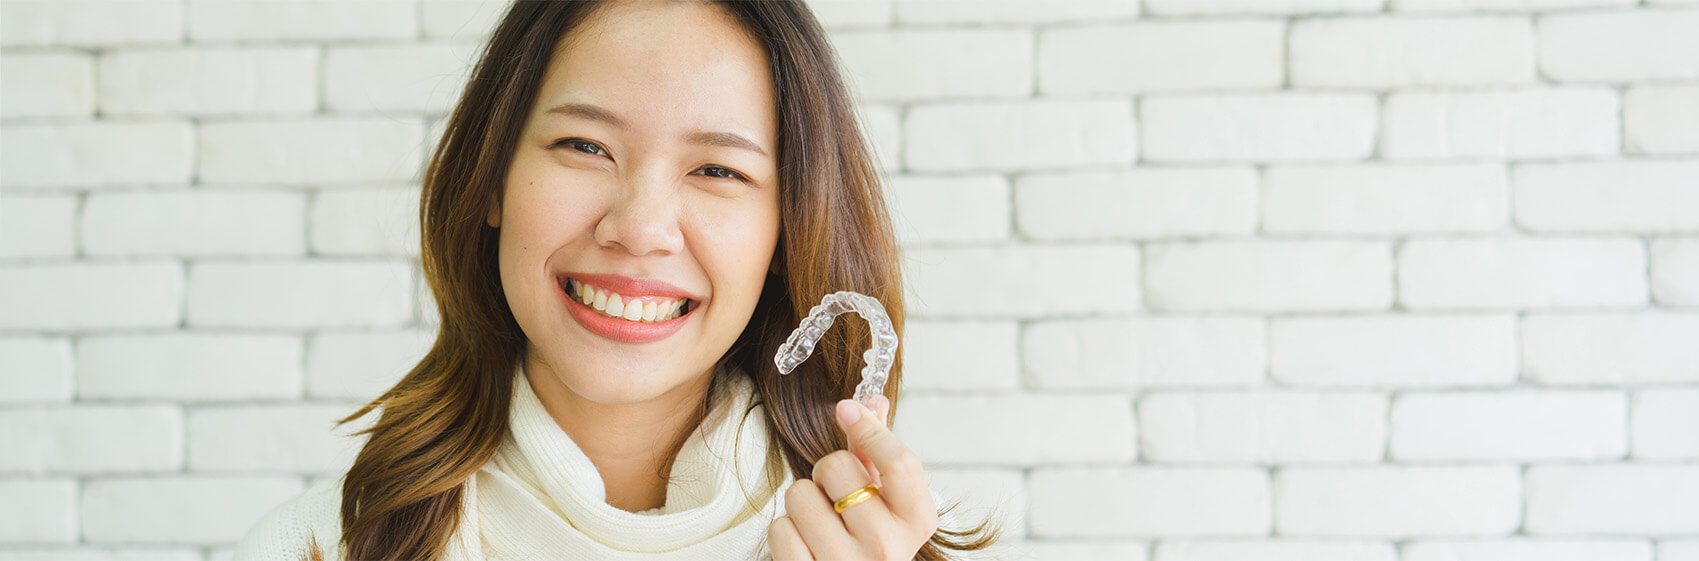 Smiling woman holding invisalign aligners